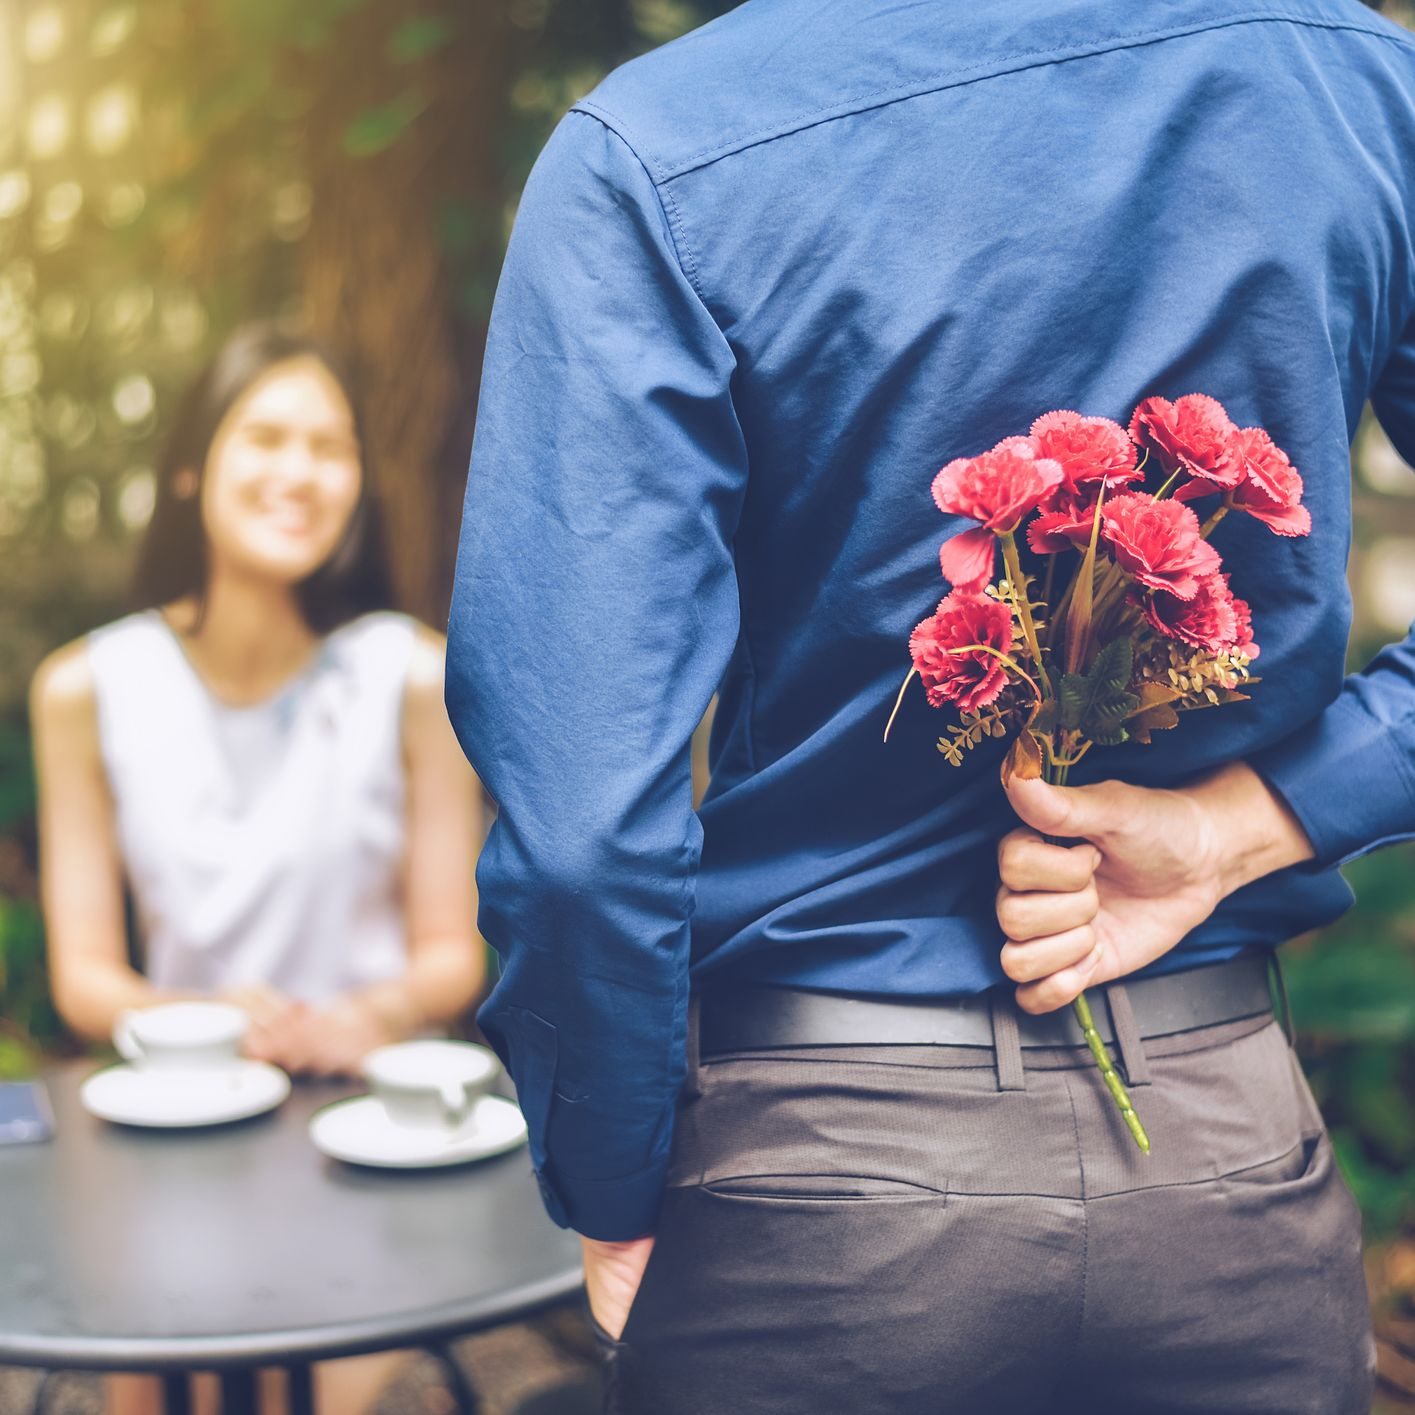 6 Definitive Signs of Nice Guy Syndrome